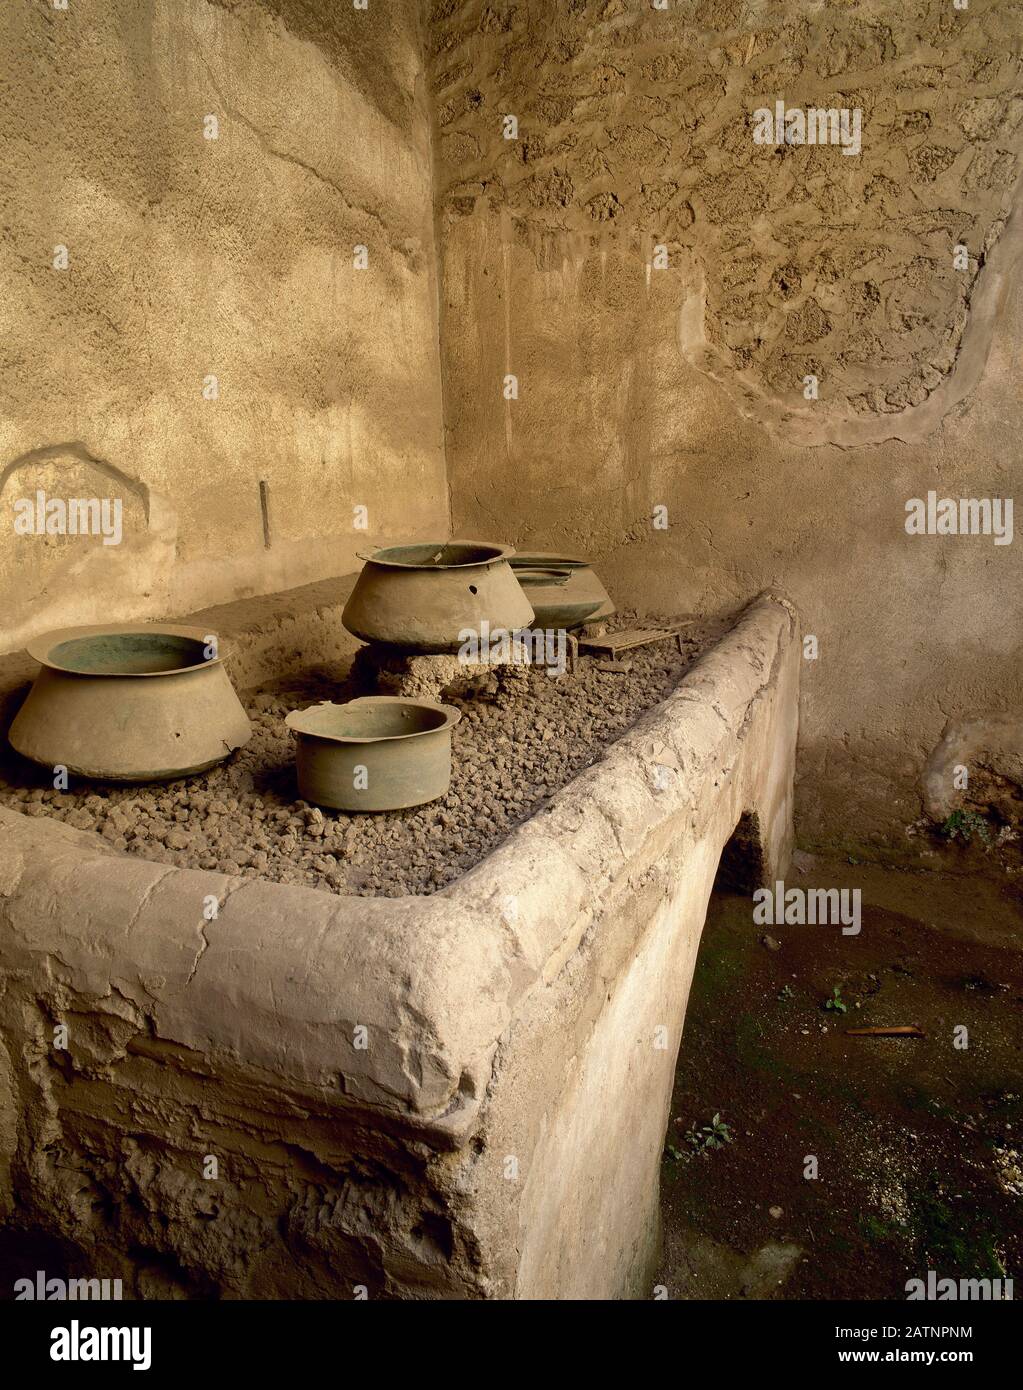 Italy, Pompeii. House of the Vetti, 1st century AD. Domus belonging to two rich merchants, Vettio Restitulo and Aulo Vettio Convivo. Kitchen with pots. Stock Photo